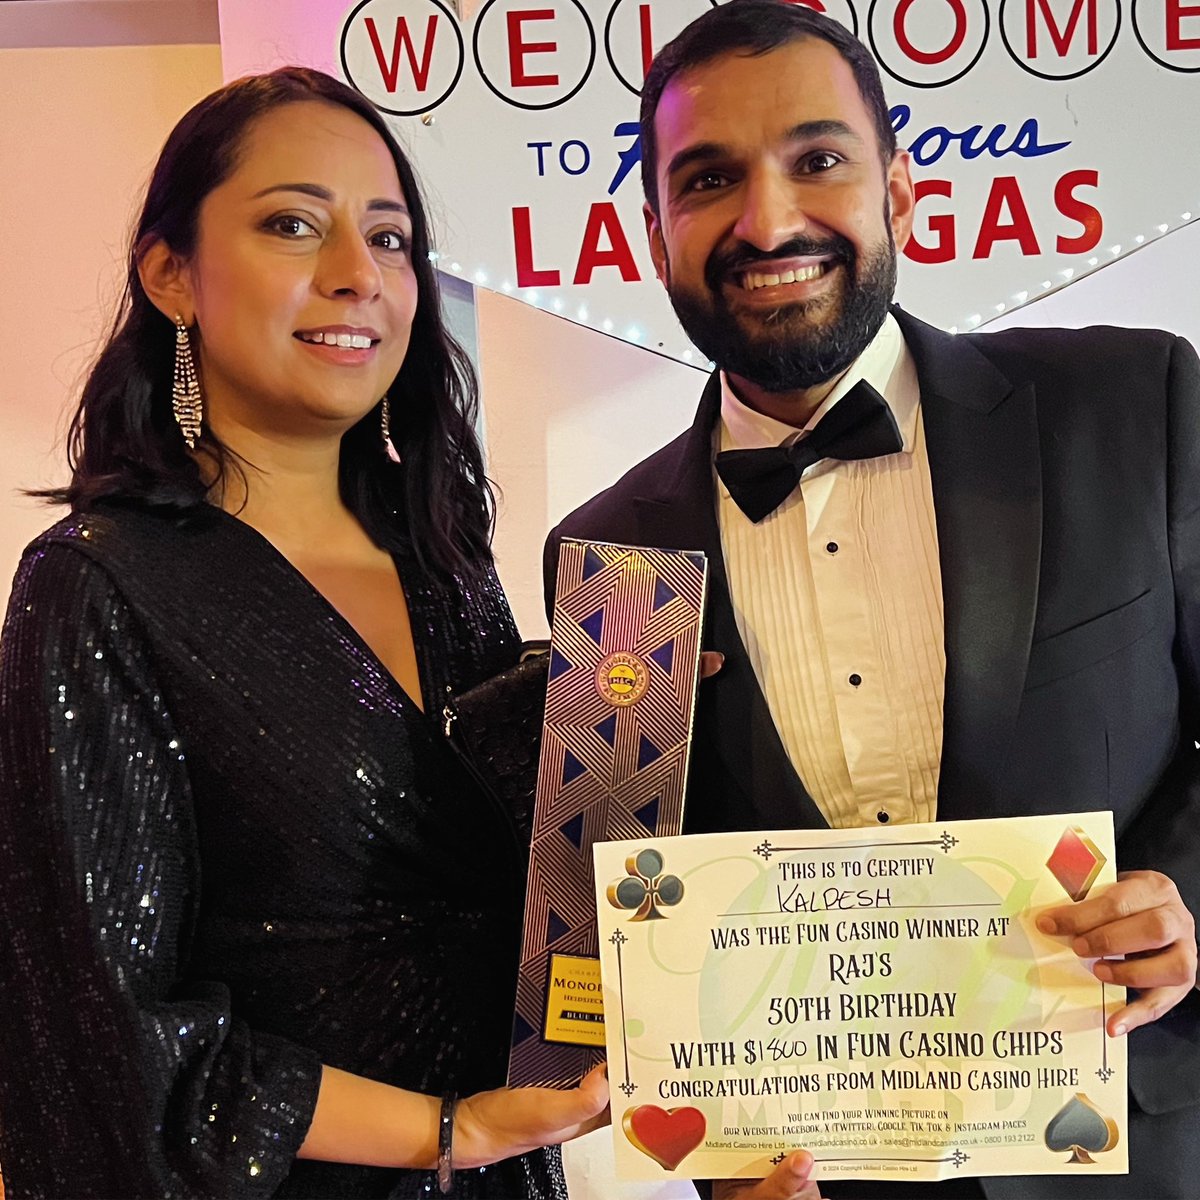 🎉 Huge congrats to Kalpesh for dominating the fun casino at Raj’s 50th Birthday bash with a whopping 1800 fun casino chips! #Winner #CasinoNight #Rajs50th #MystiqueSuite #Leicester #CasinoFun #EventEntertainment #LeicestershireParties #MidlandsEvents #funcasinouk